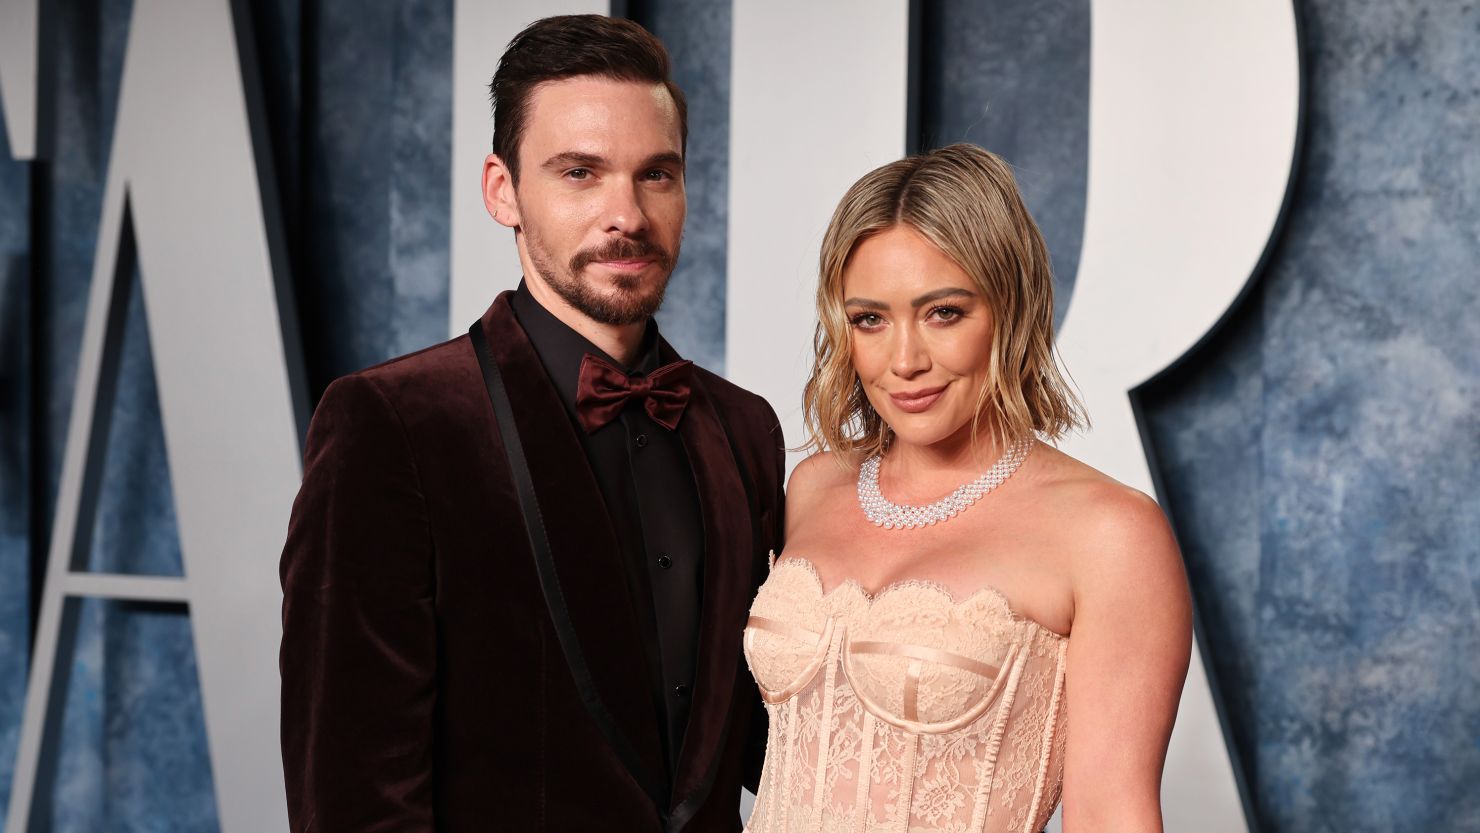 Matthew Koma and Hilary Duff attend the 2023 Vanity Fair Oscar Party Hosted By Radhika Jones at Wallis Annenberg Center for the Performing Arts on March 12, 2023 in Beverly Hills, California.